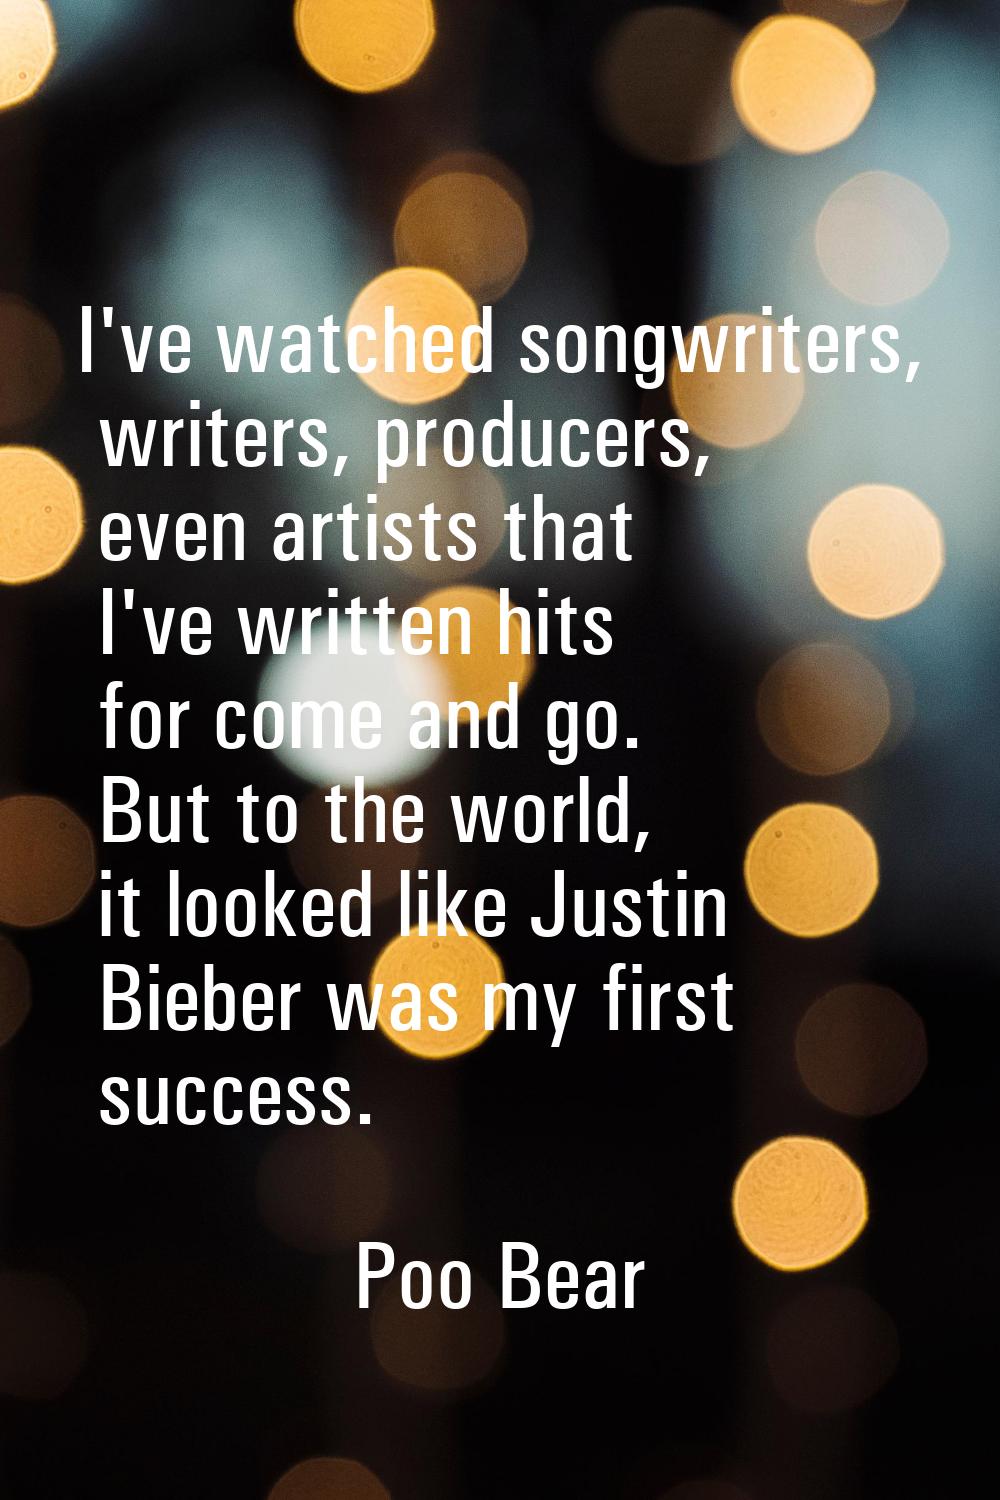 I've watched songwriters, writers, producers, even artists that I've written hits for come and go. 